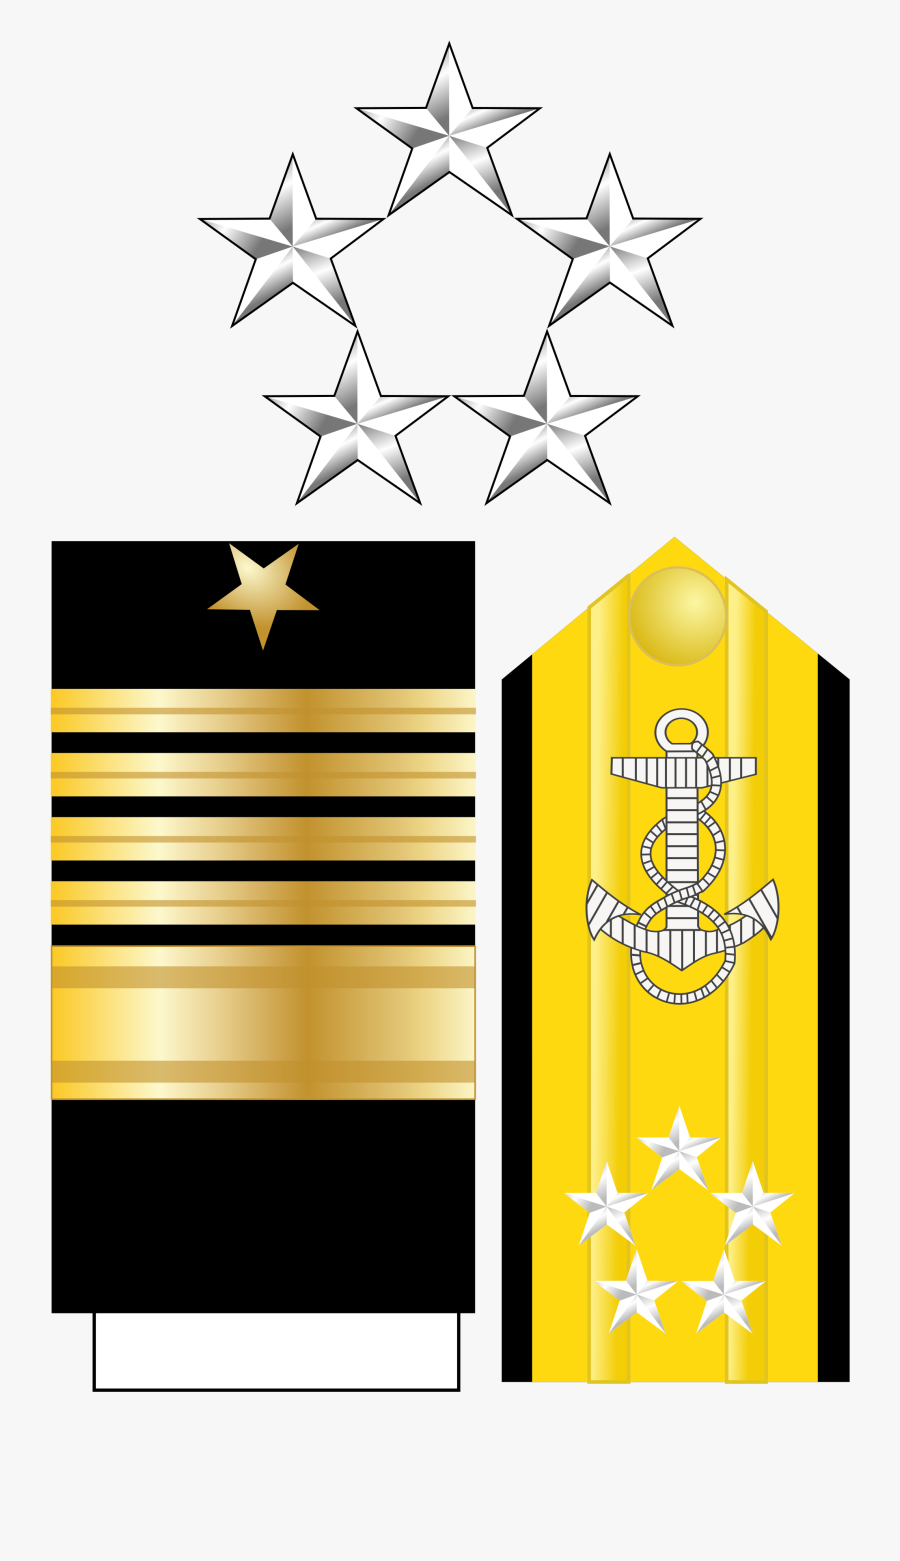 United States Navy Rate And Rank Structure - Fleet Admiral Shoulder Boards, Transparent Clipart